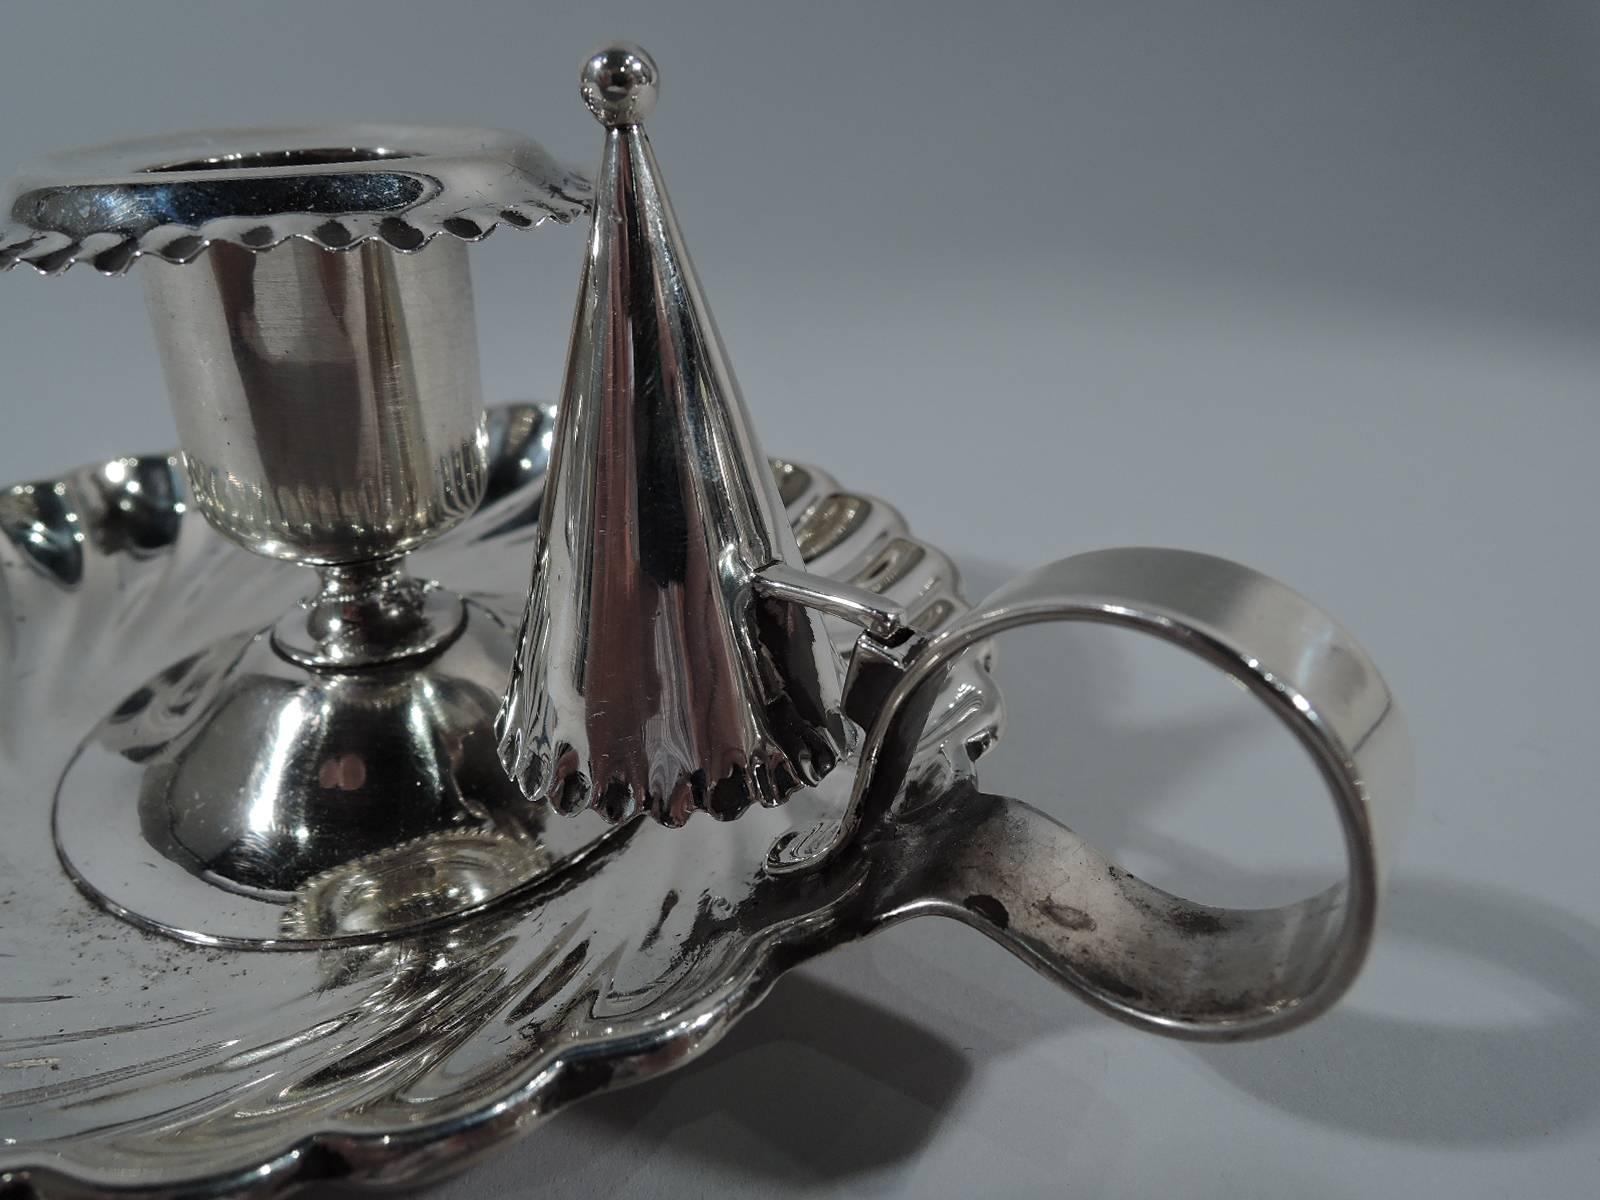 Sterling silver chamberstick. Made by Tiffany & Co. in New York, circa 1894. Urn socket on mounted to raised foot. Tray has curved sides with twisted fluting and scalloped rim. Plain ring handle with snuffer support. Snuffer conical with bead finial